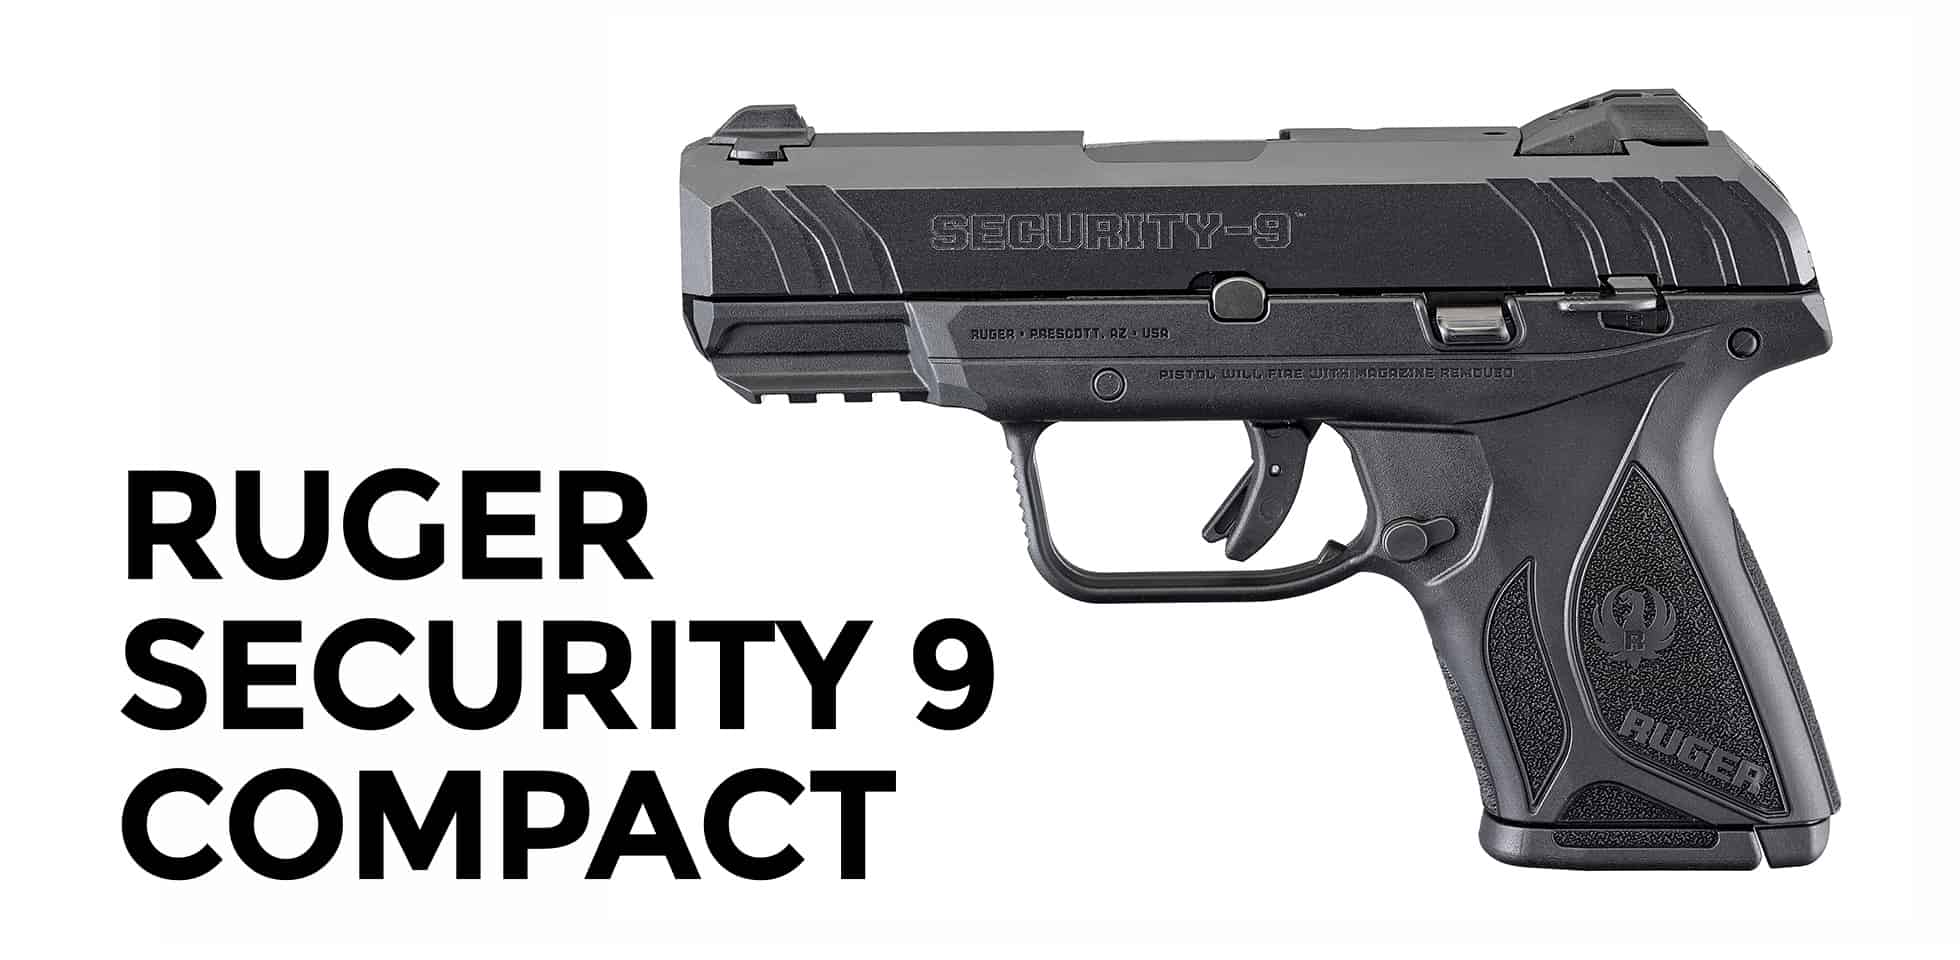 Ruger Security 9 Compact is a cheap gun that offers great value